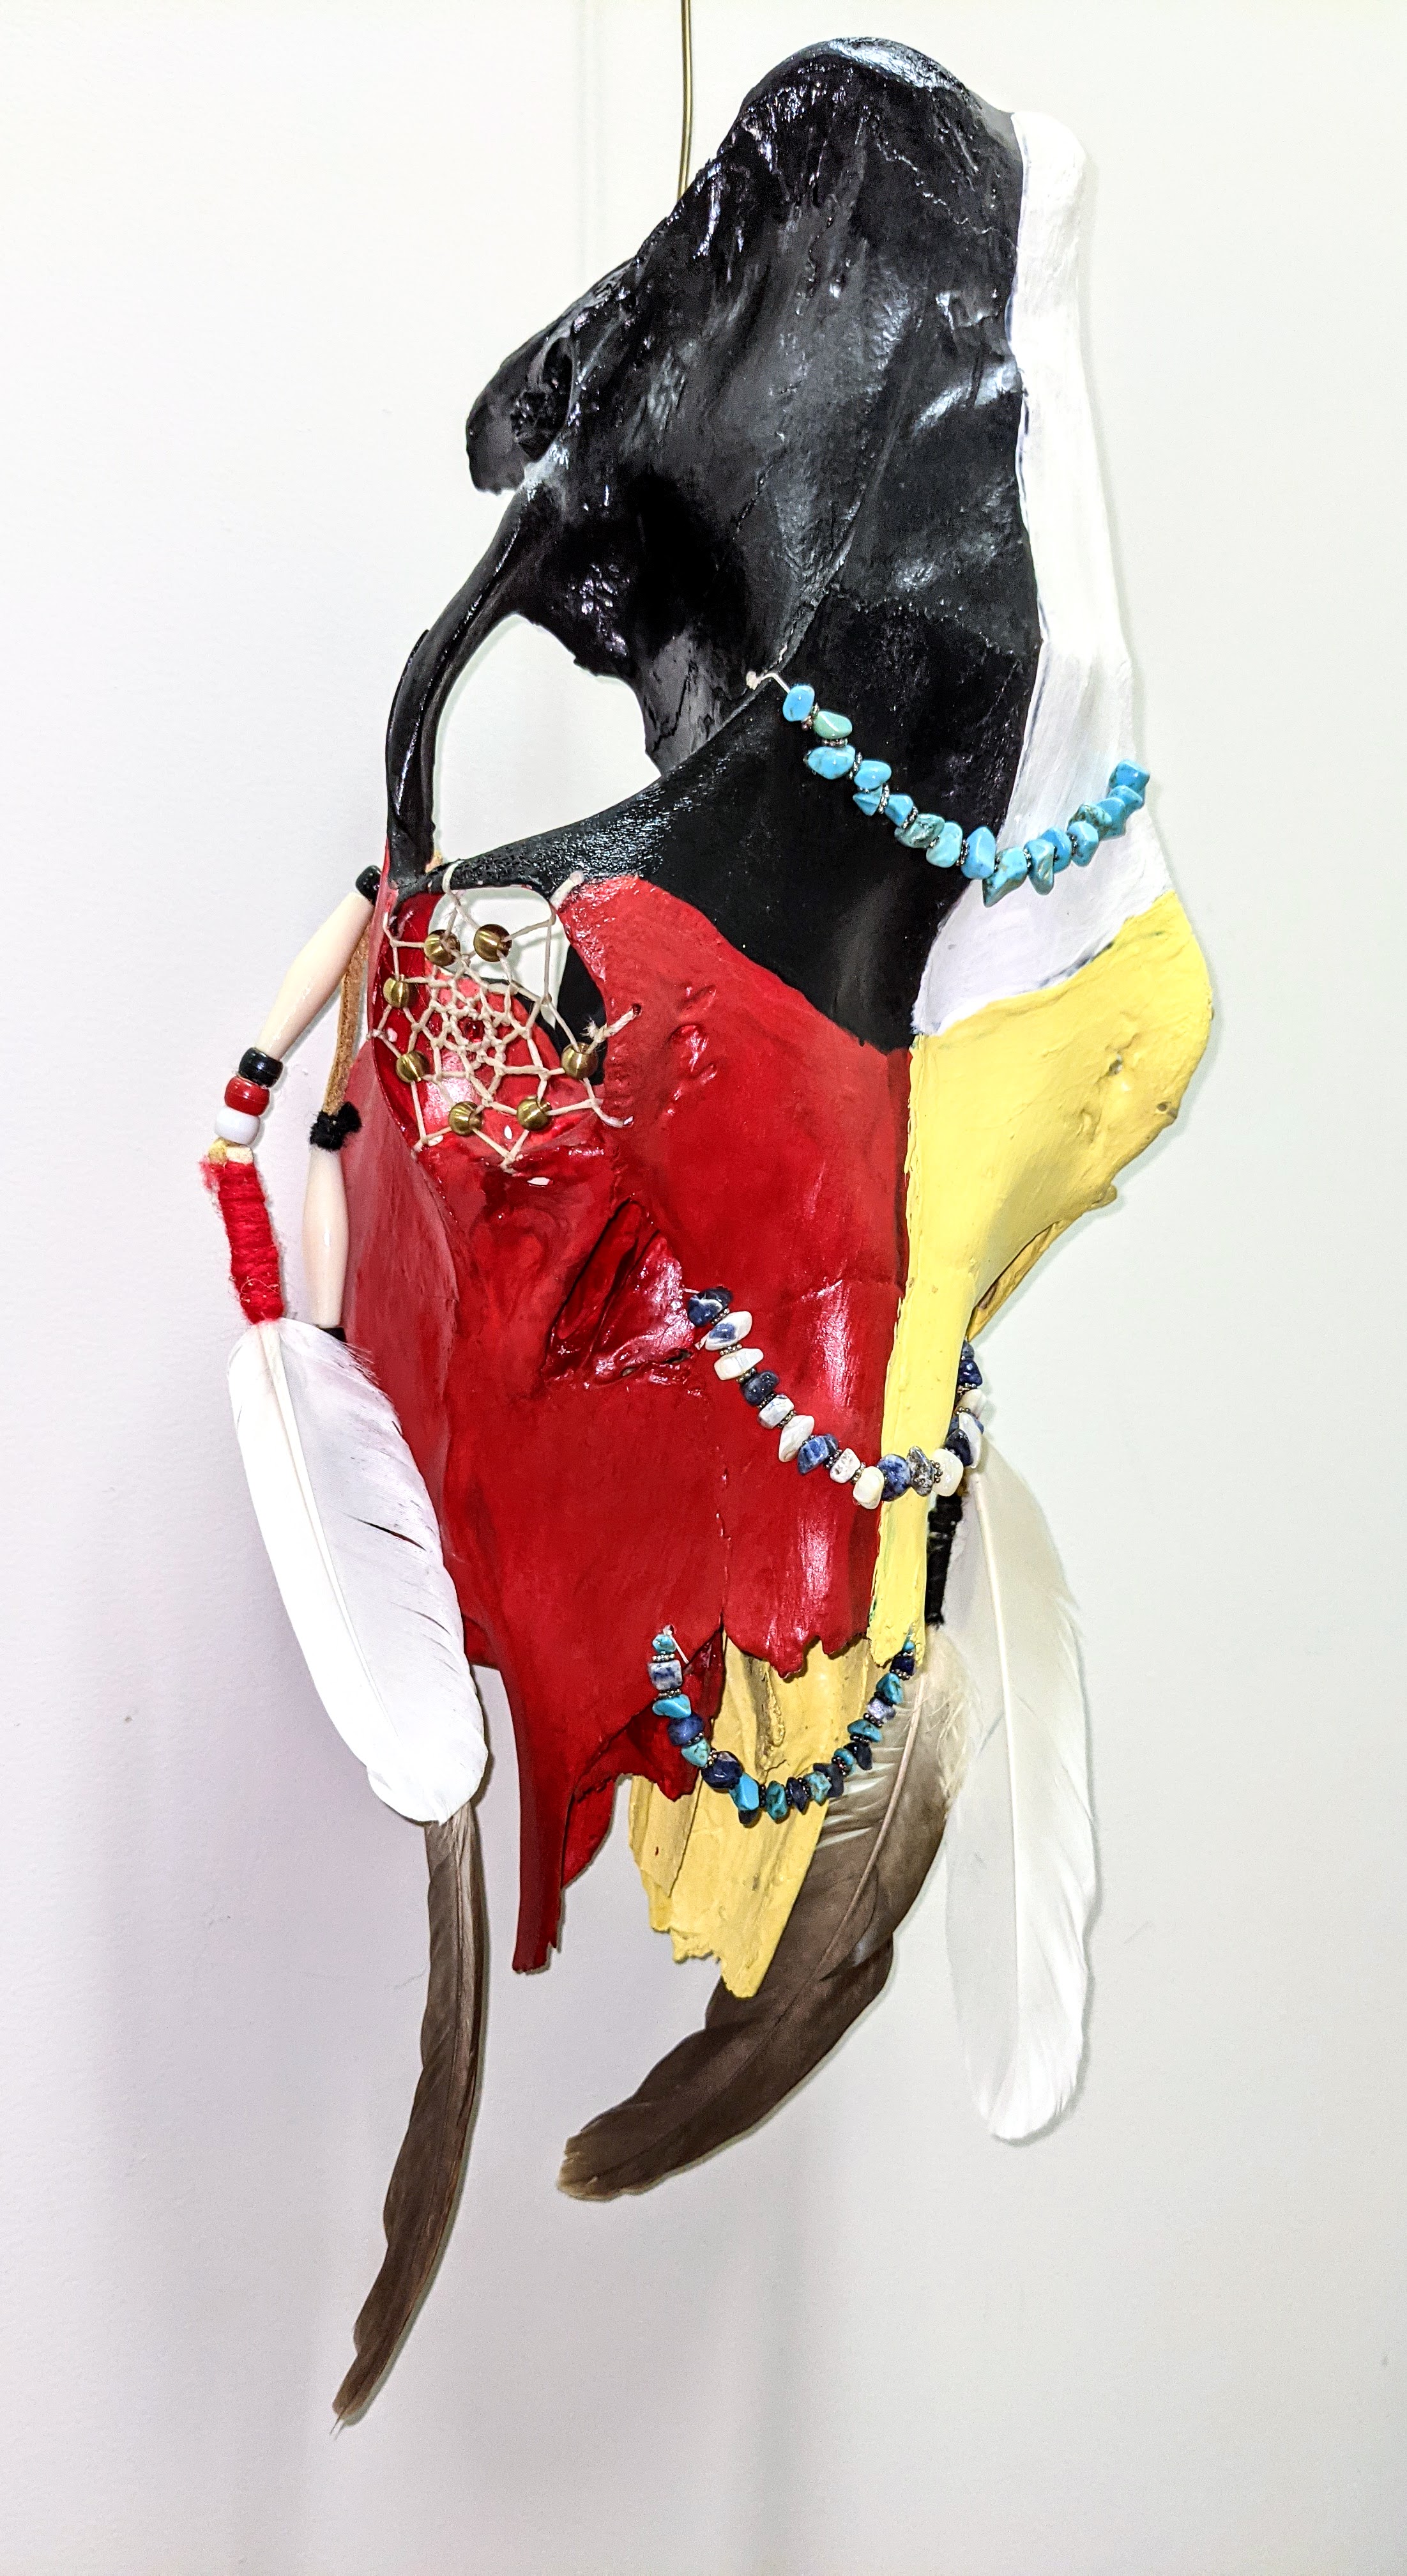 A newer addition to our collection (2018) this beautiful moose skull was kindly donated by Michael Hamelin. The four main colors (Black, white, yellow and red) compose the medicine wheel - each color representing various aspects of life. Today (Oct. 4th) is international animal day which advocates for the humane treatment of animals world wide. Started in 1925 this commemorative day is nearly at its centennial. We felt this skull aligns with this day as it depicts that though moose are commonly hunted for their meat - other parts of the body can be used in various applications - thereby not being wasteful and respecting the animal; a common practice by indigenous nations.

04/10/2021
2018.18.01 / Hamelin, Michael